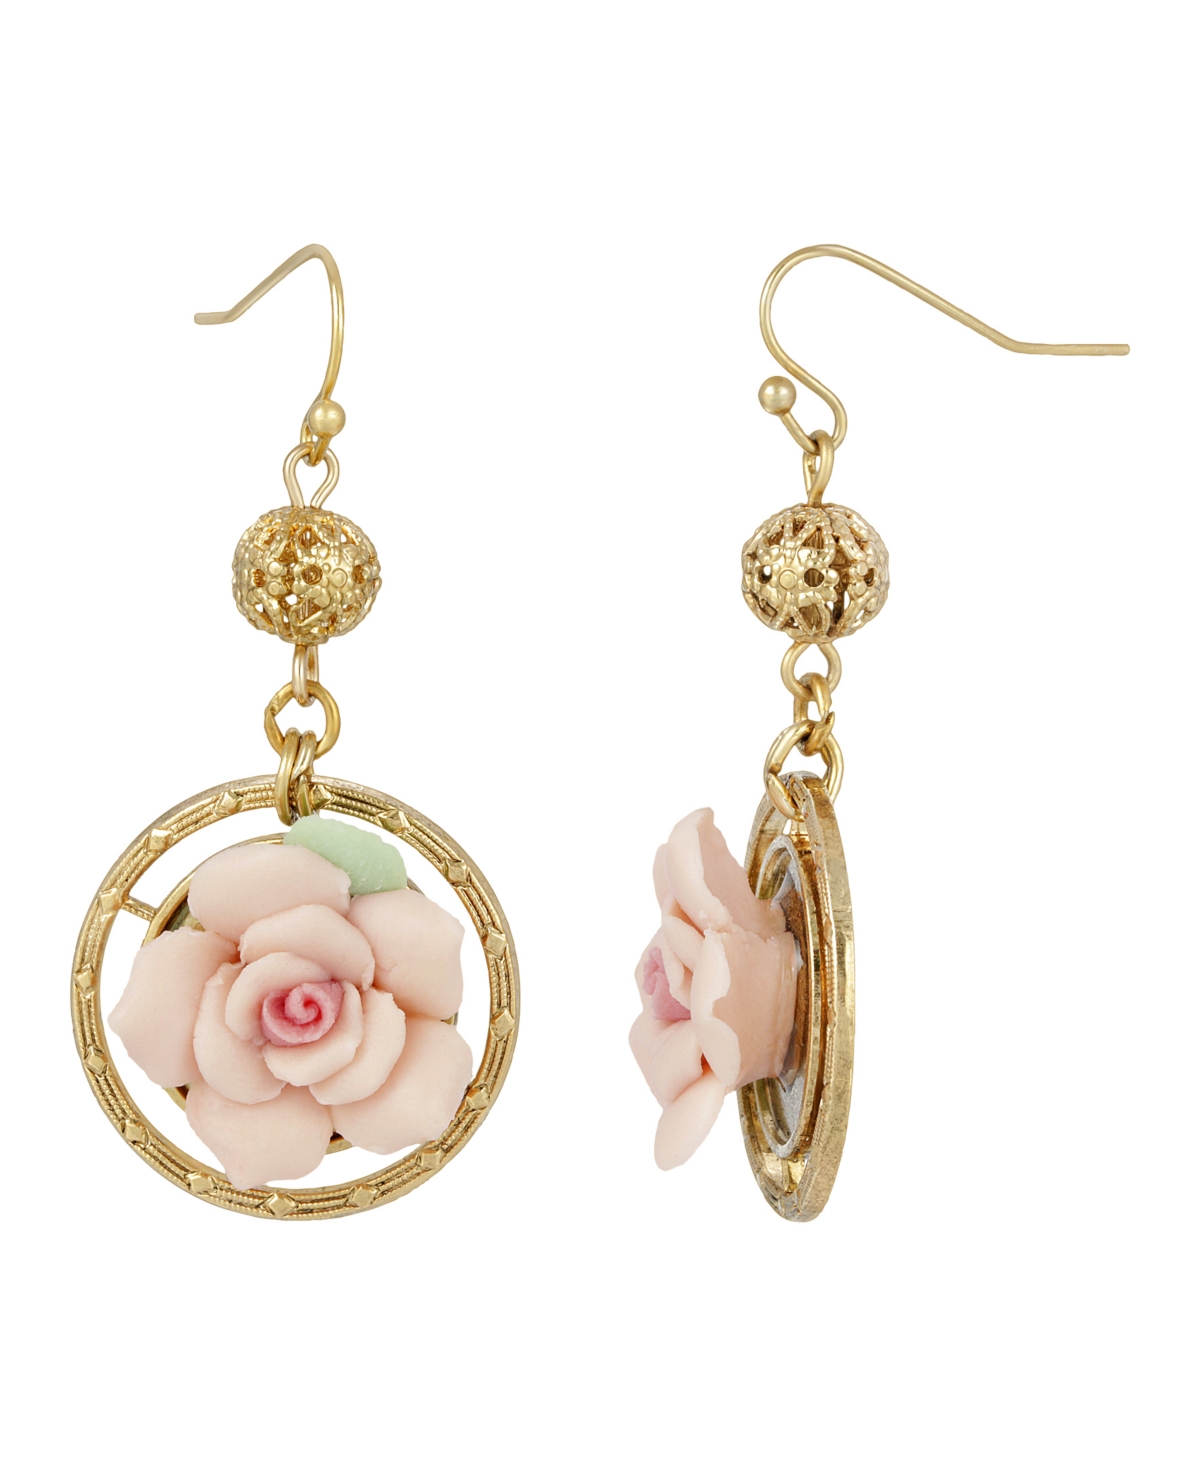 2028 14k Gold Plated Large Pink Porcelain Rose Drop Earrings